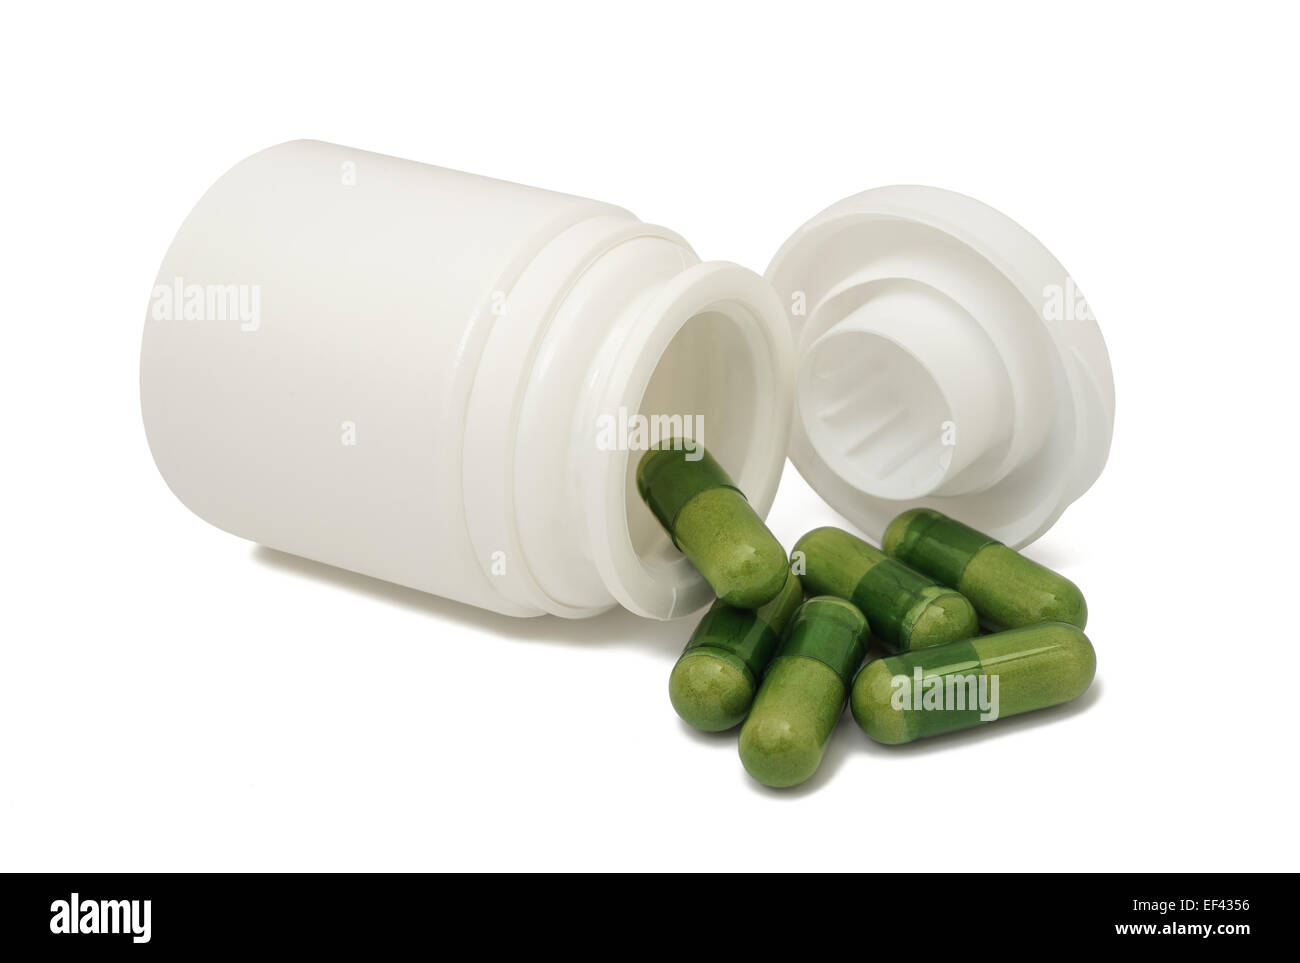 Green pills with container isolated on white Stock Photo